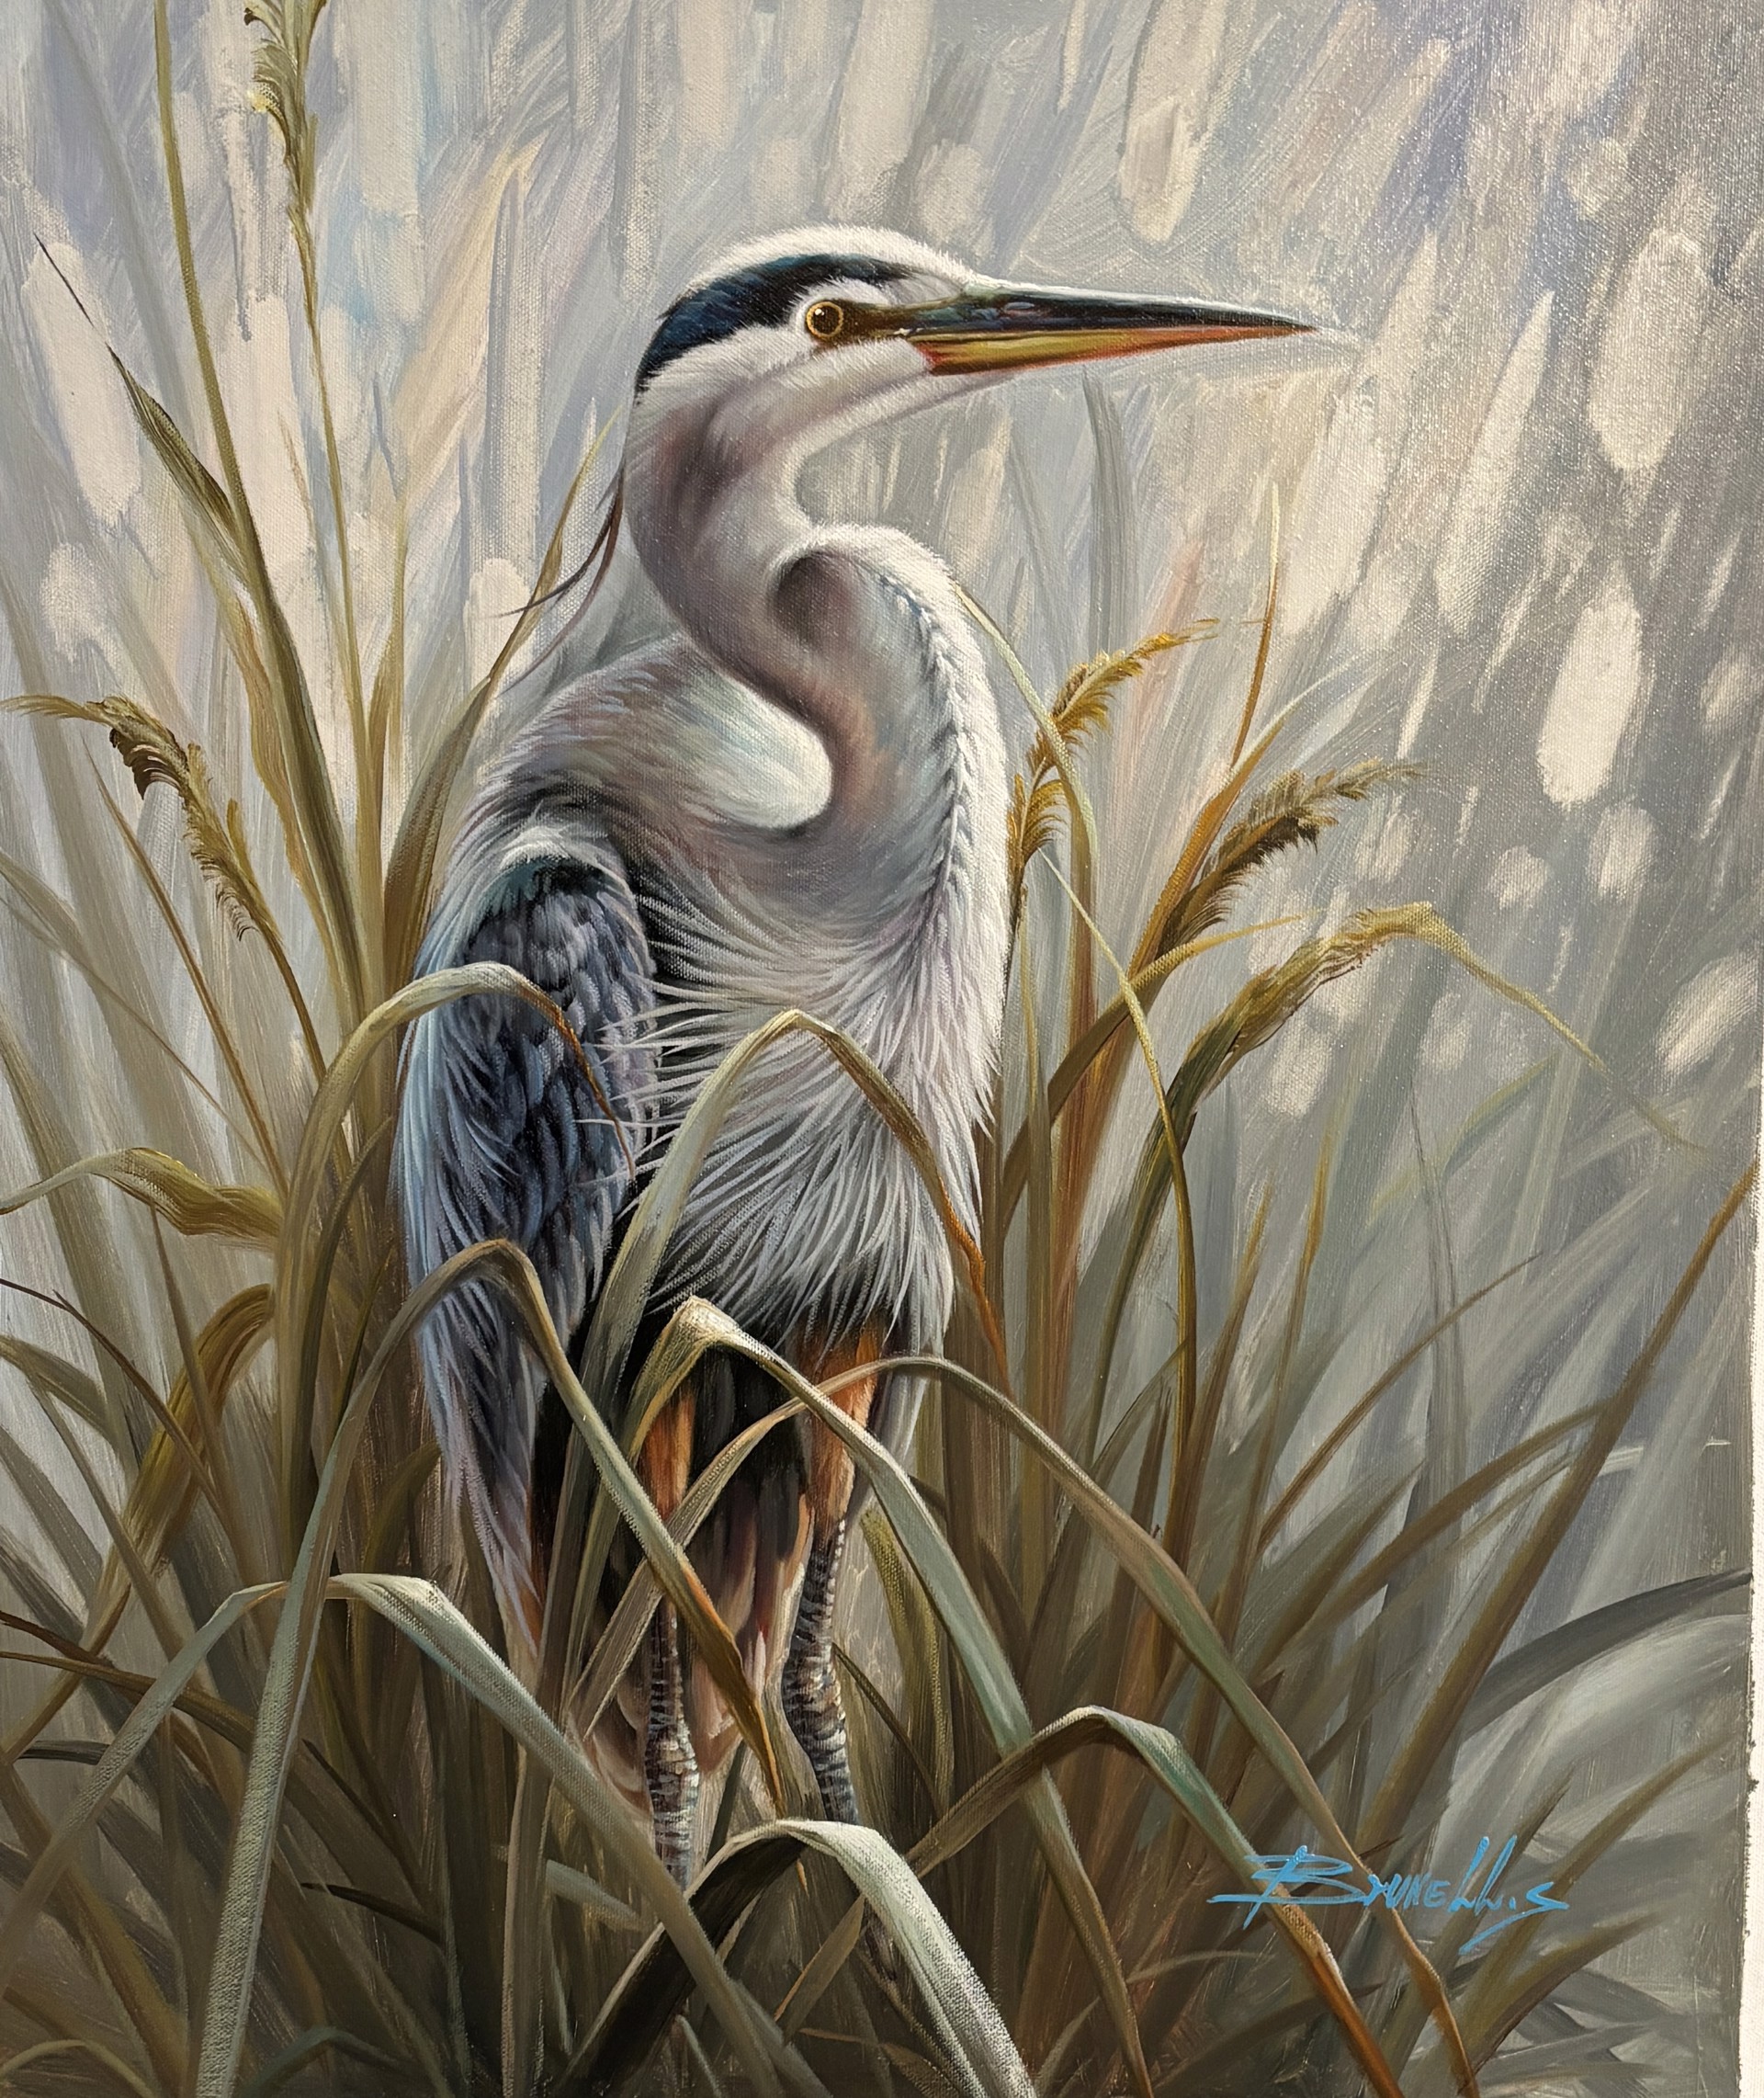 BLUE HERON IN TALL GRASS by BRUNELLY